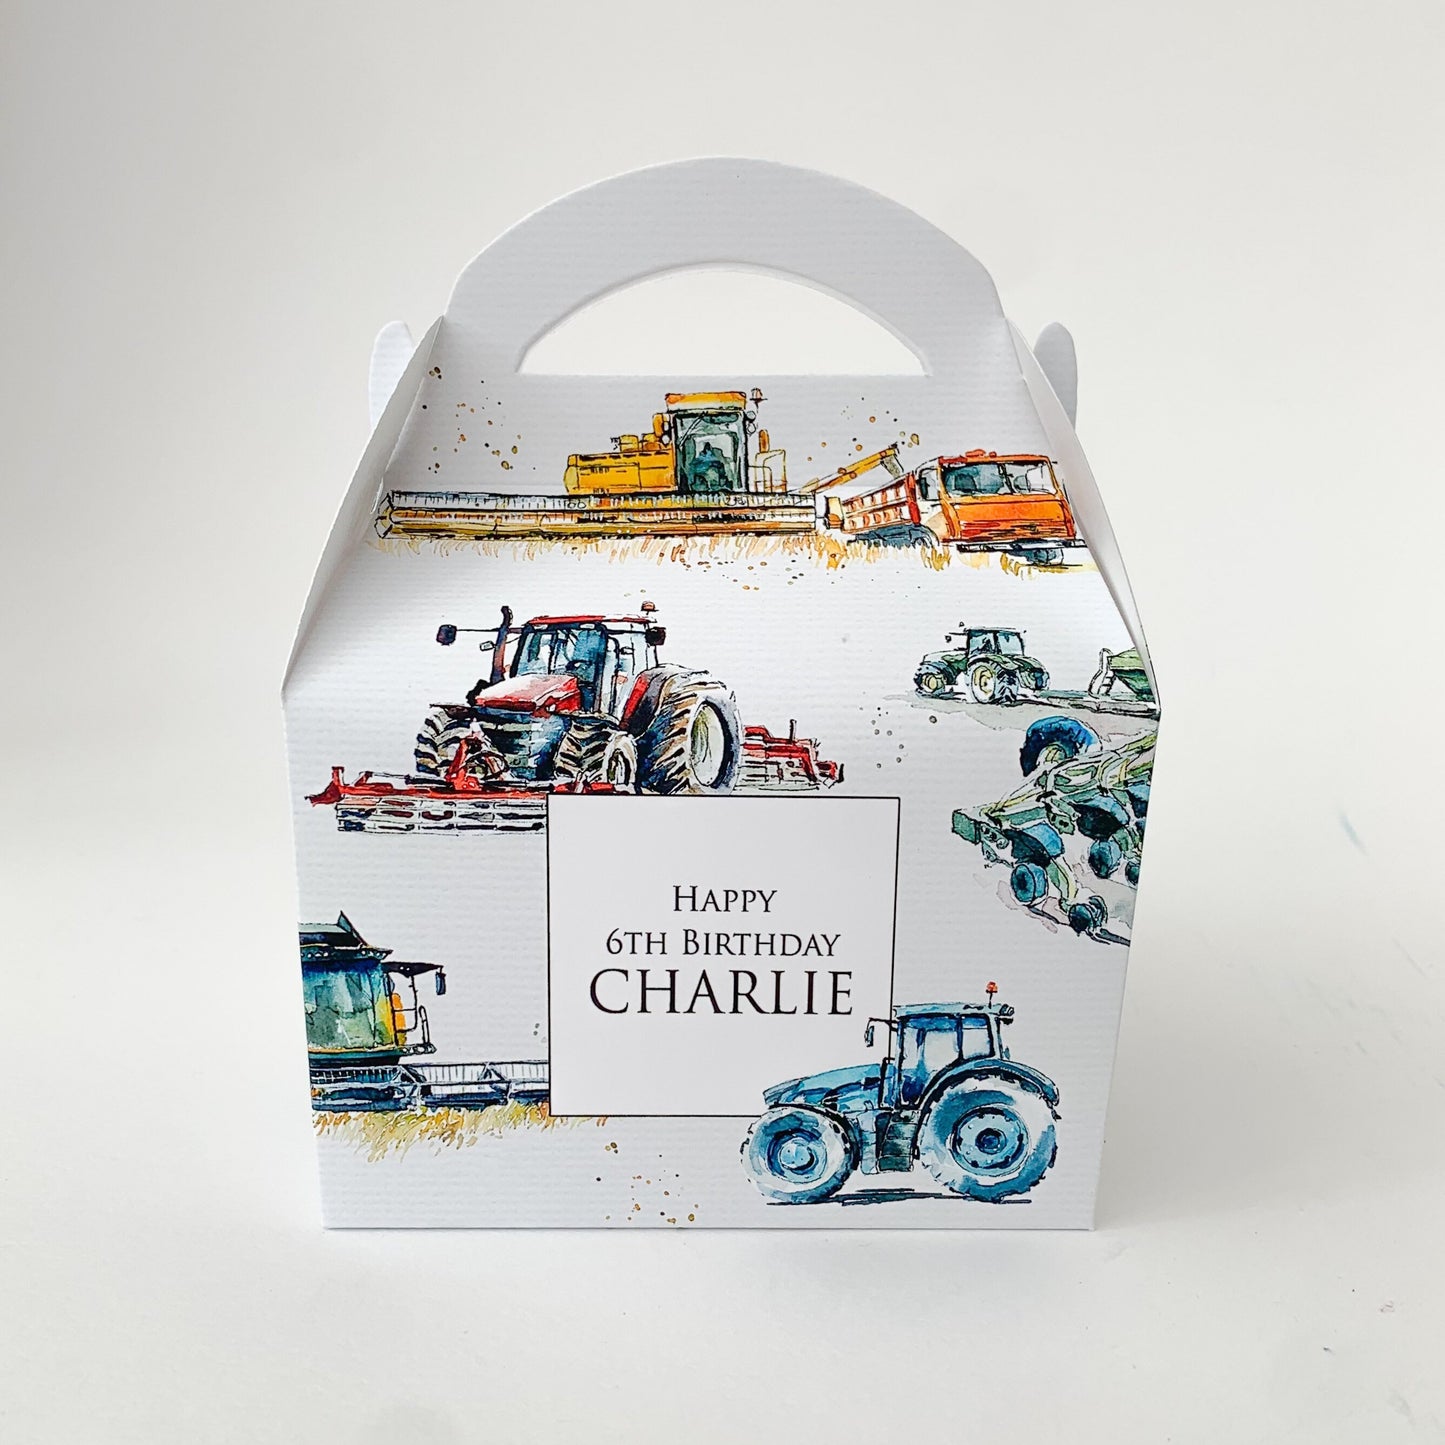 Tractor farming machinery and equipment Personalised Children’s Party Box Gift Bag Favour